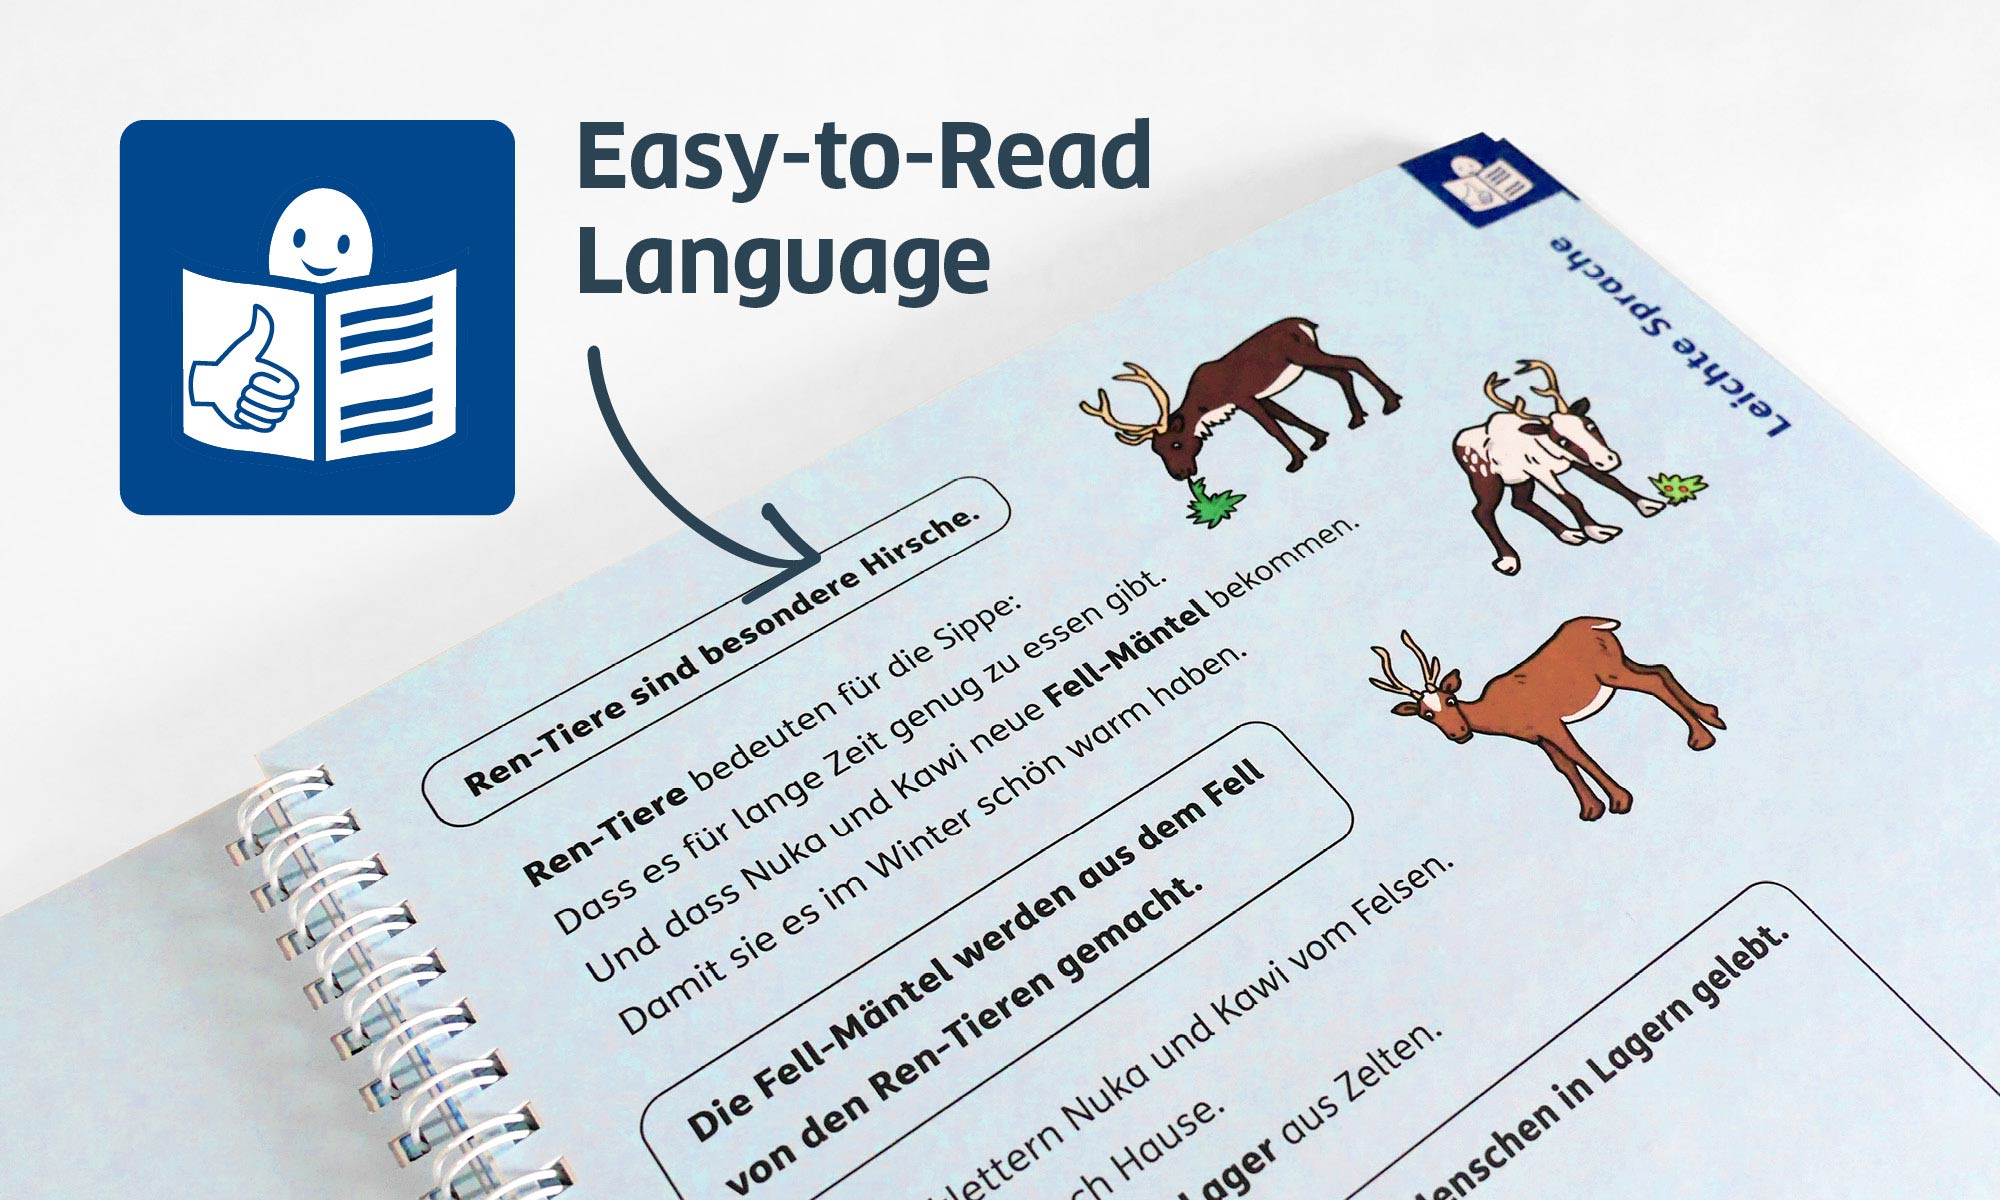 Close-up of a blue easy-to-read language page, which always follows a double page with everyday language and Braille. In the upper left corner of the picture is a pictogram for easy-to-read language. An arrow points to the book page.